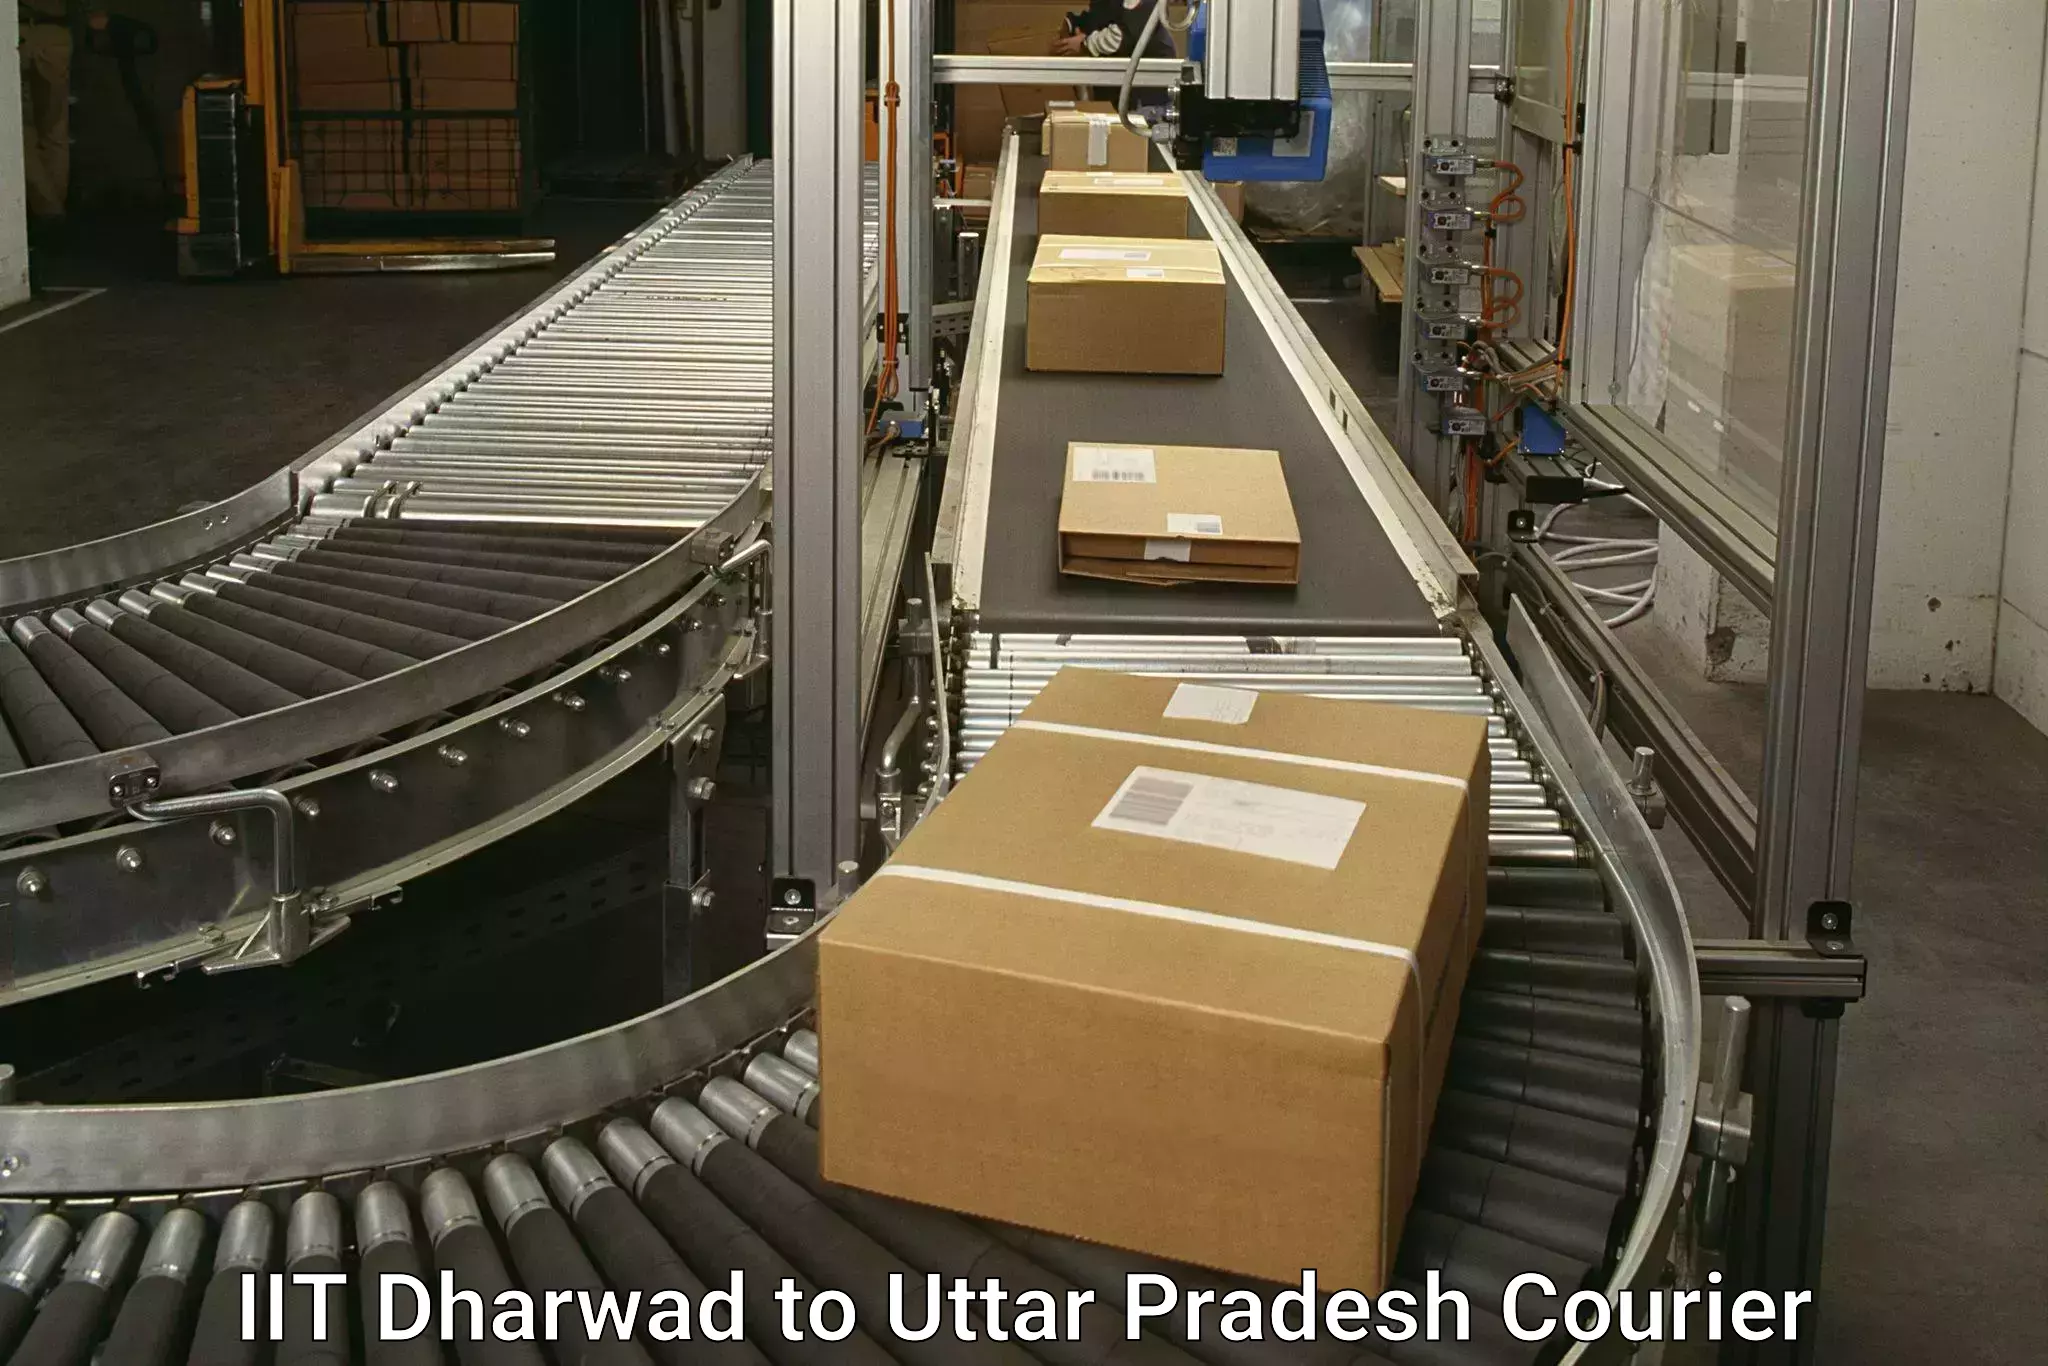 Rapid shipping services in IIT Dharwad to Aligarh